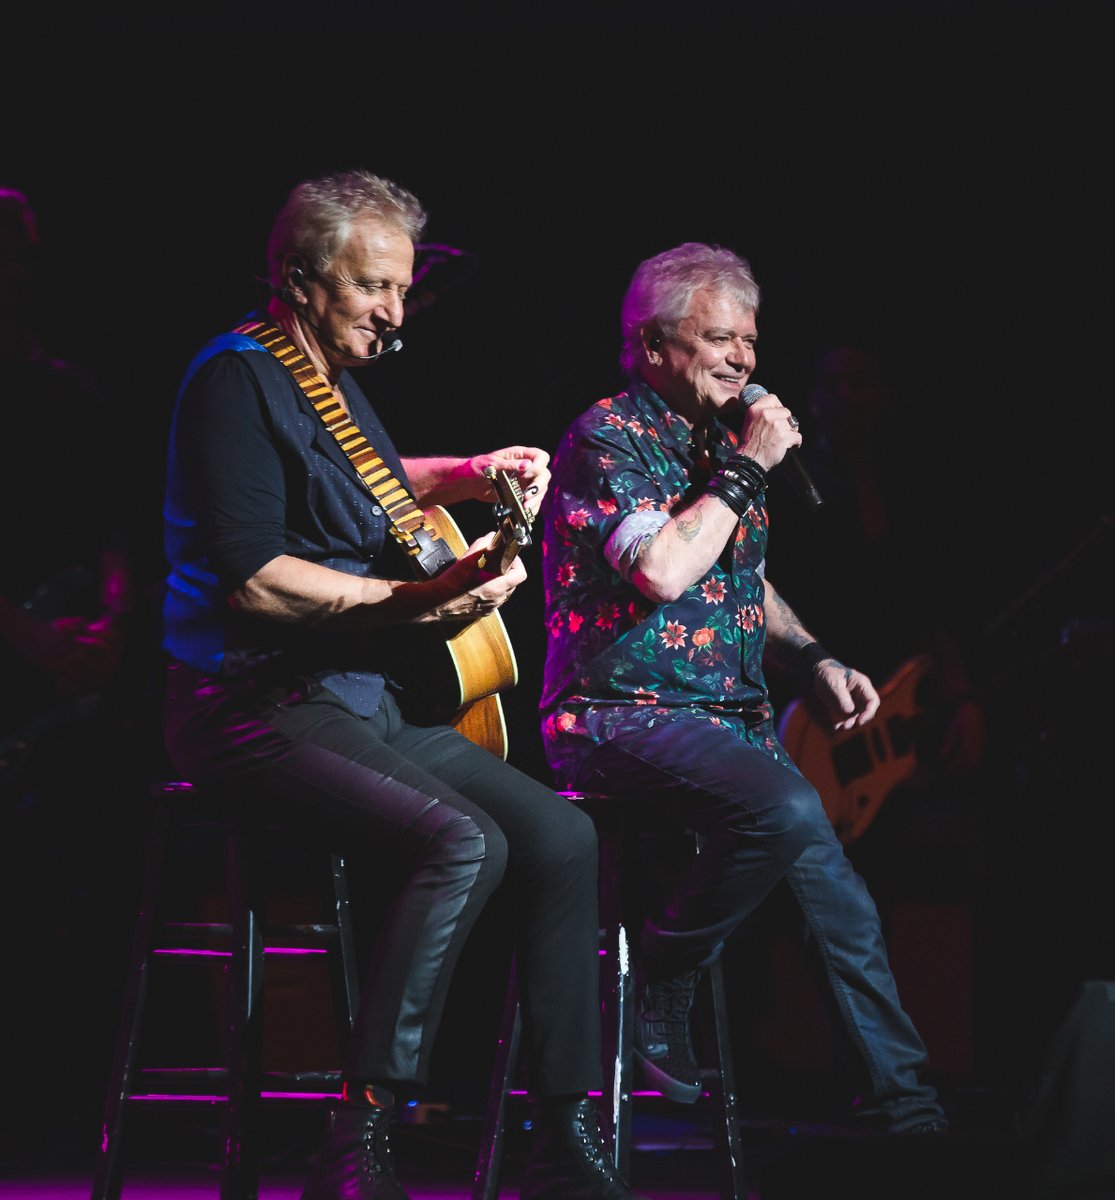 Don't miss your chance to see Air Supply live at Westgate Las Vegas this May 31st & June 1st! resort.to/Air-Supply